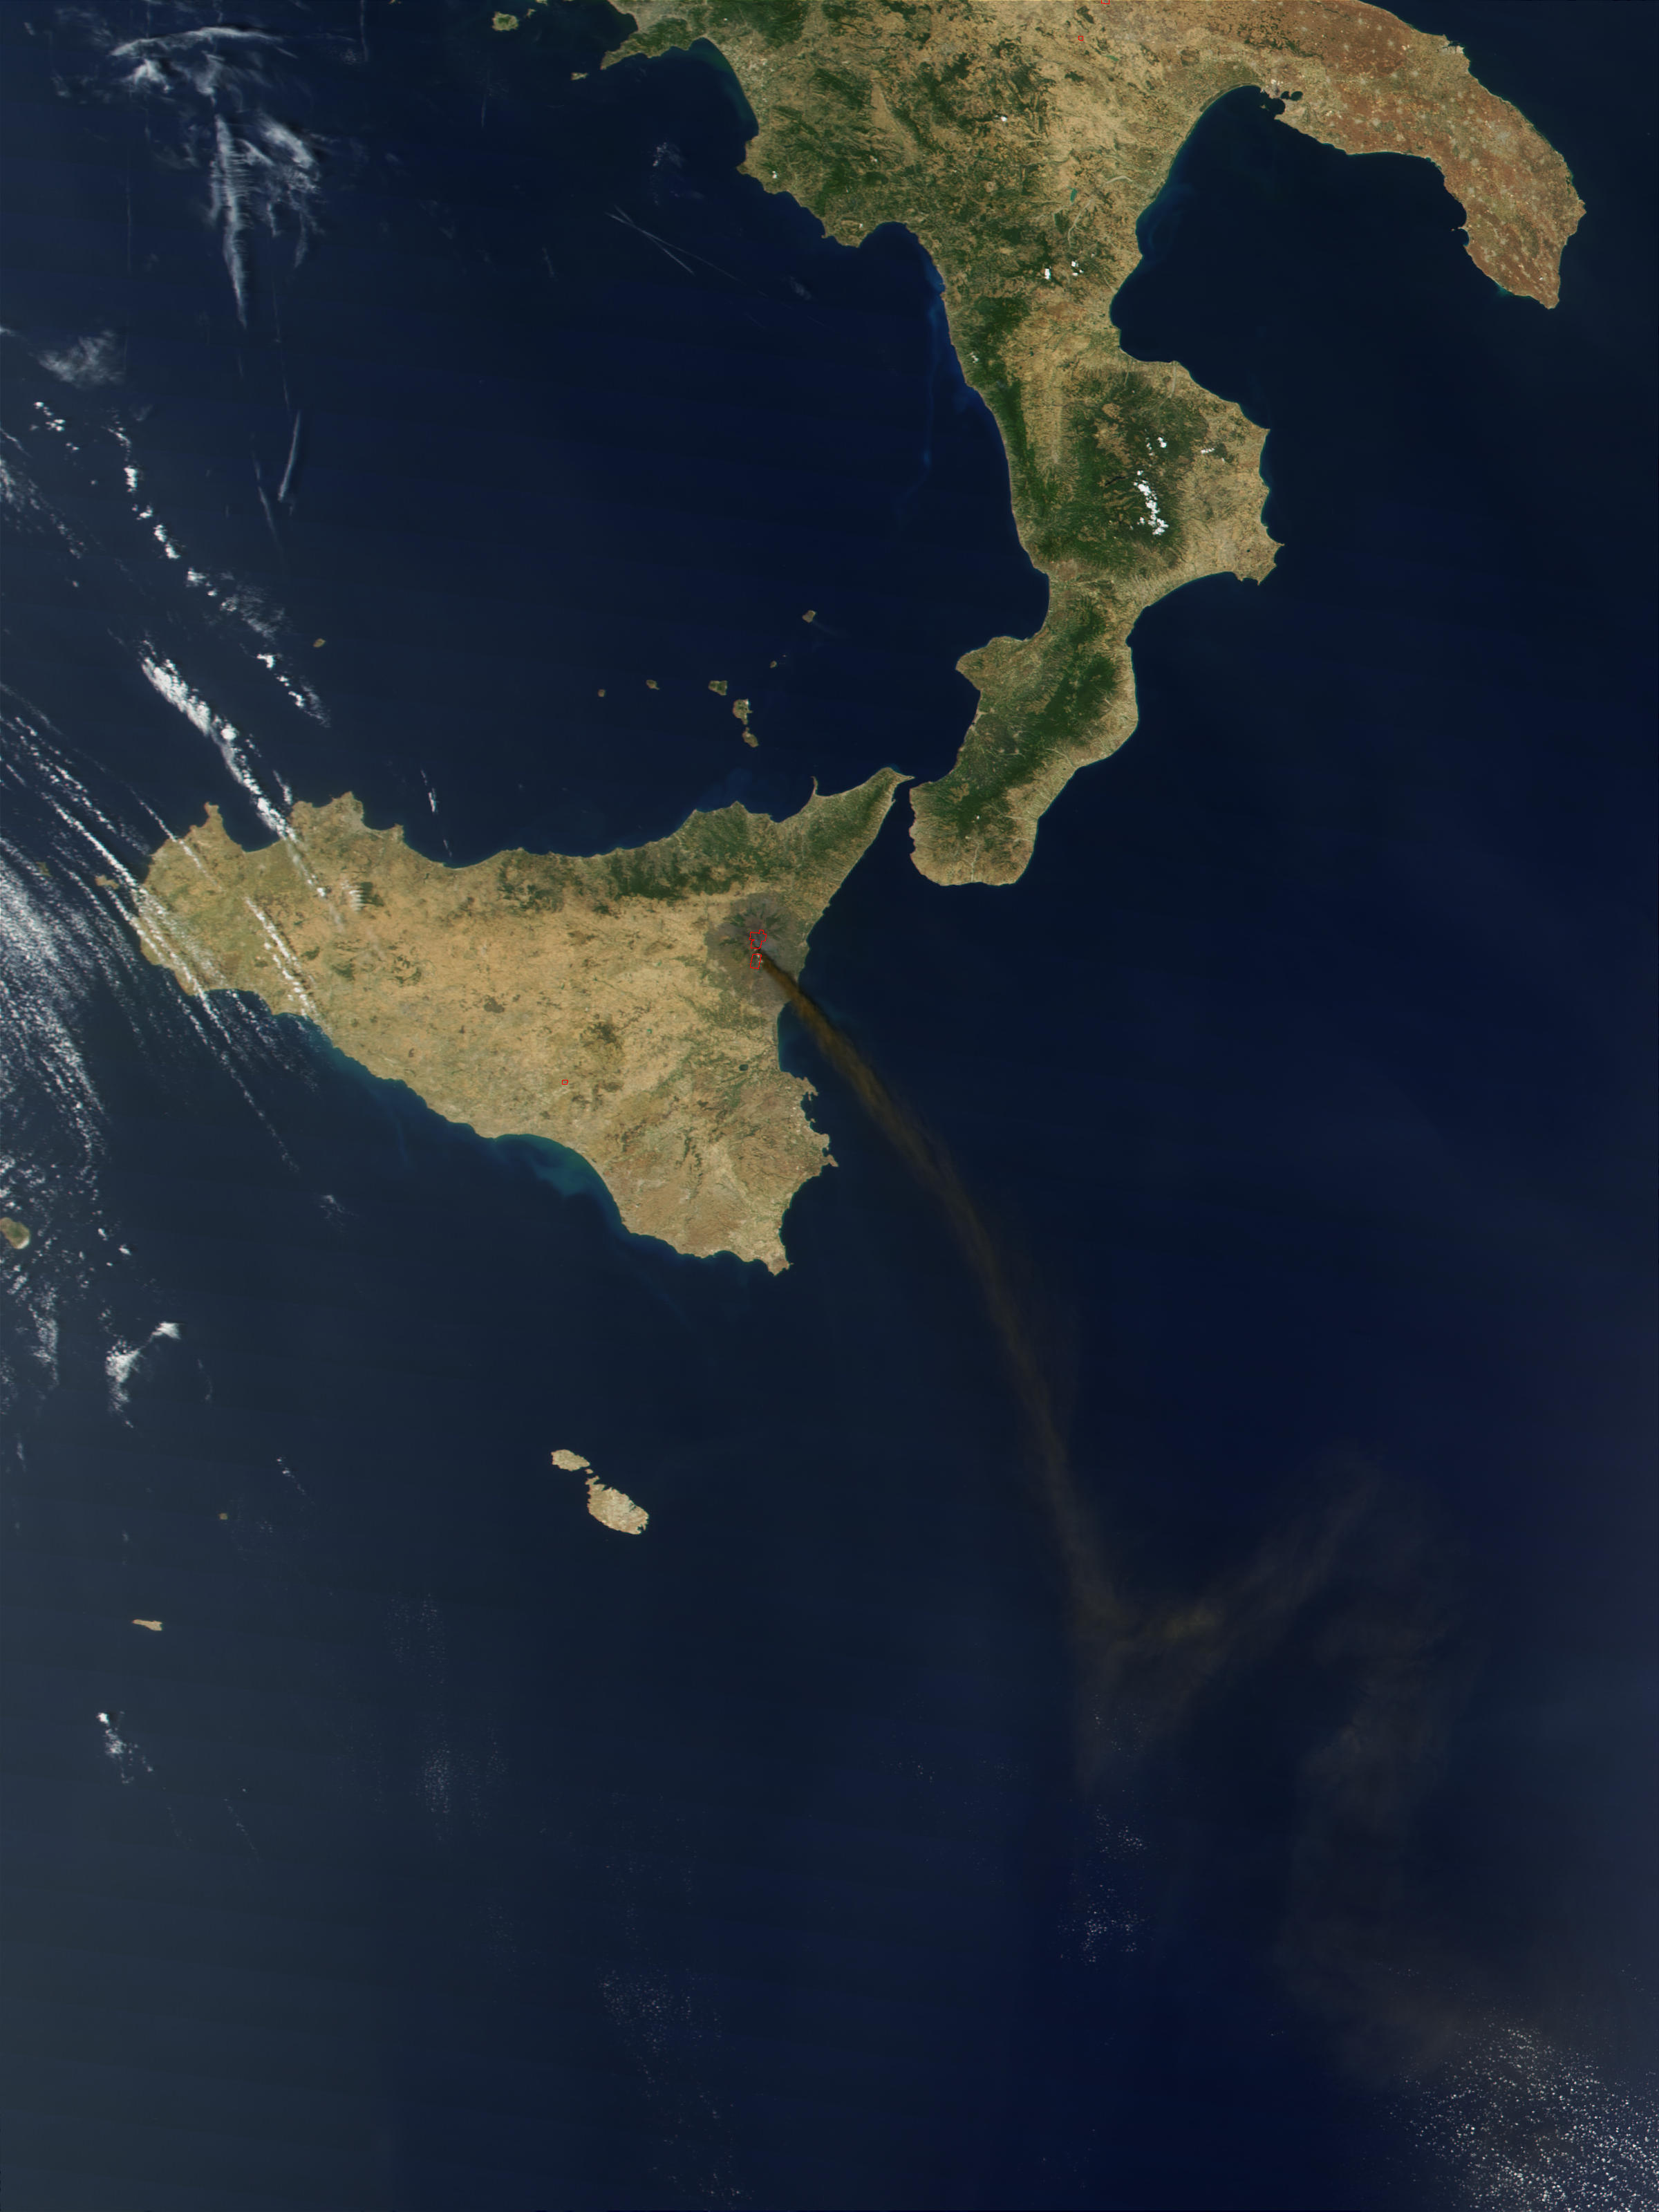 Ash plume and lava flow streaming from Mt. Etna in Sicily, Italy - related image preview